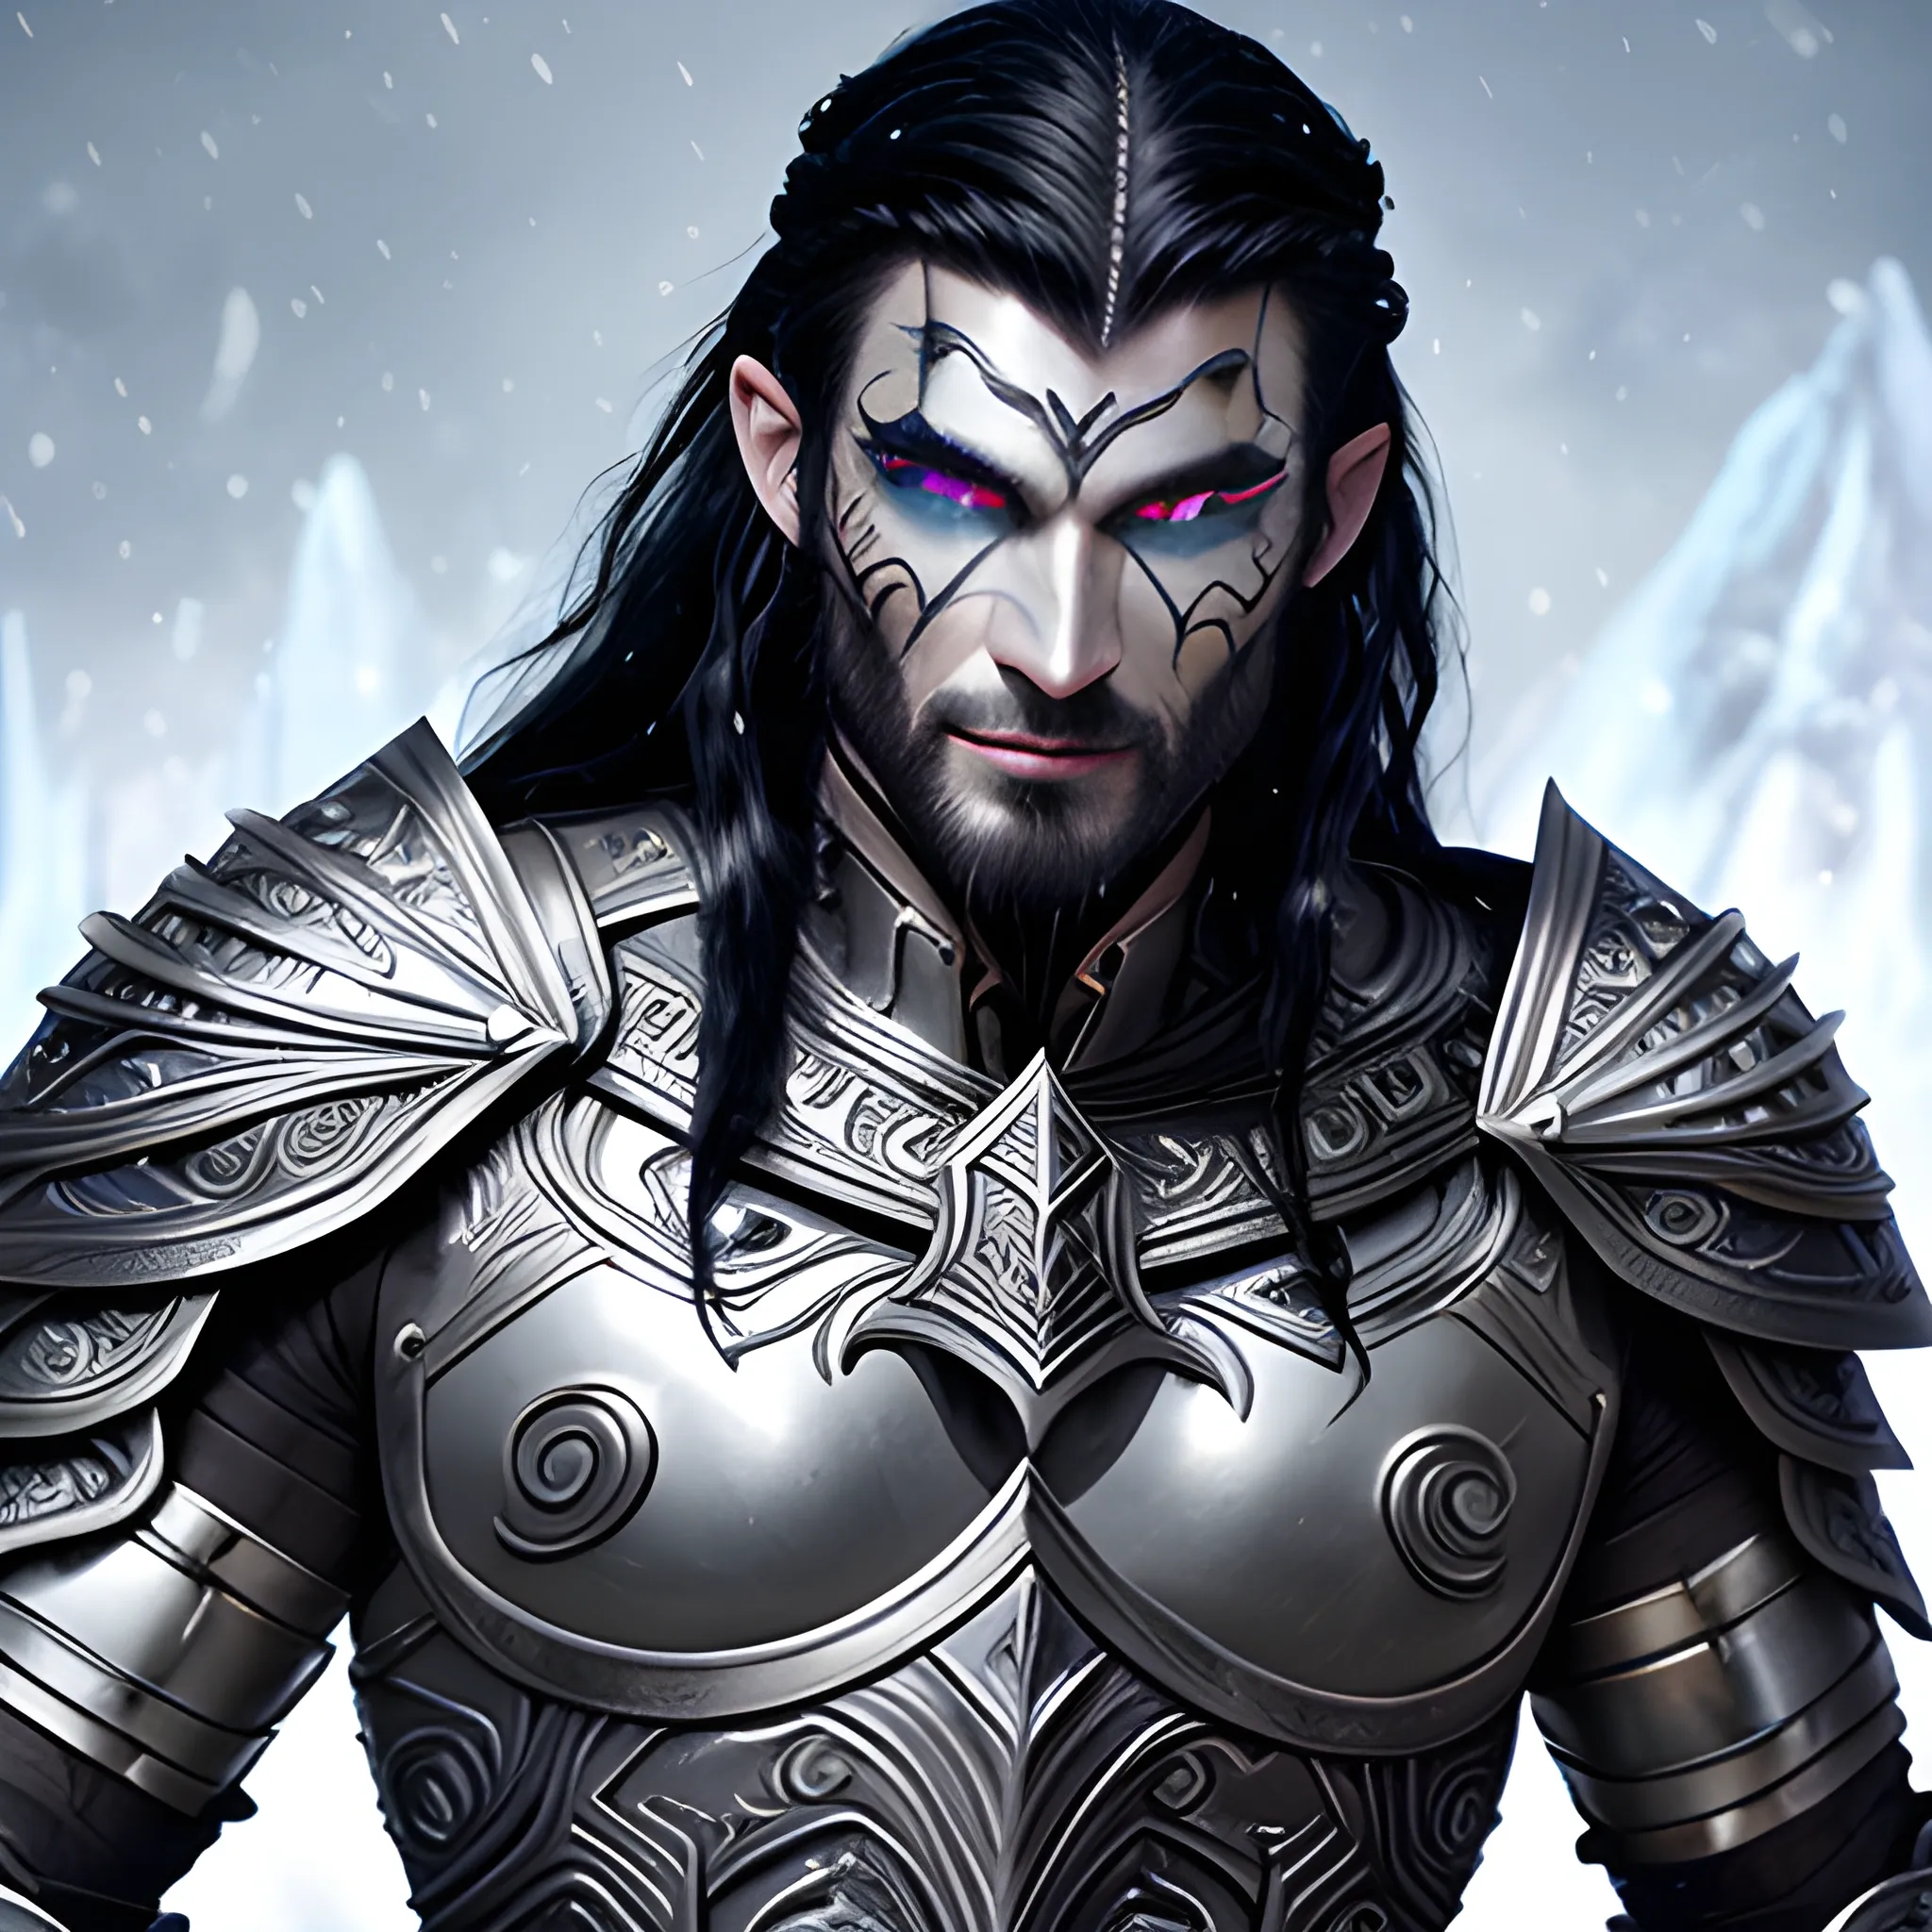 fantasy, paladin, warrior, metal skin, male, long black hair, icy eyes, blue eyes, intricate light silver armor, smiling, hyper realistic, dungeons and dragons, strong, armed, black hair, Oil Painting, filigree skin, silver skin, silver flame necklace, grey skin, iron skin, platinum skin, human ears, Oil Painting, young, handsome, thin tribal facial tattoos, steel eyes, face tattoo, face scarring, aluminium skin, friendly, no helmet, happy, confident, black hair, grinning